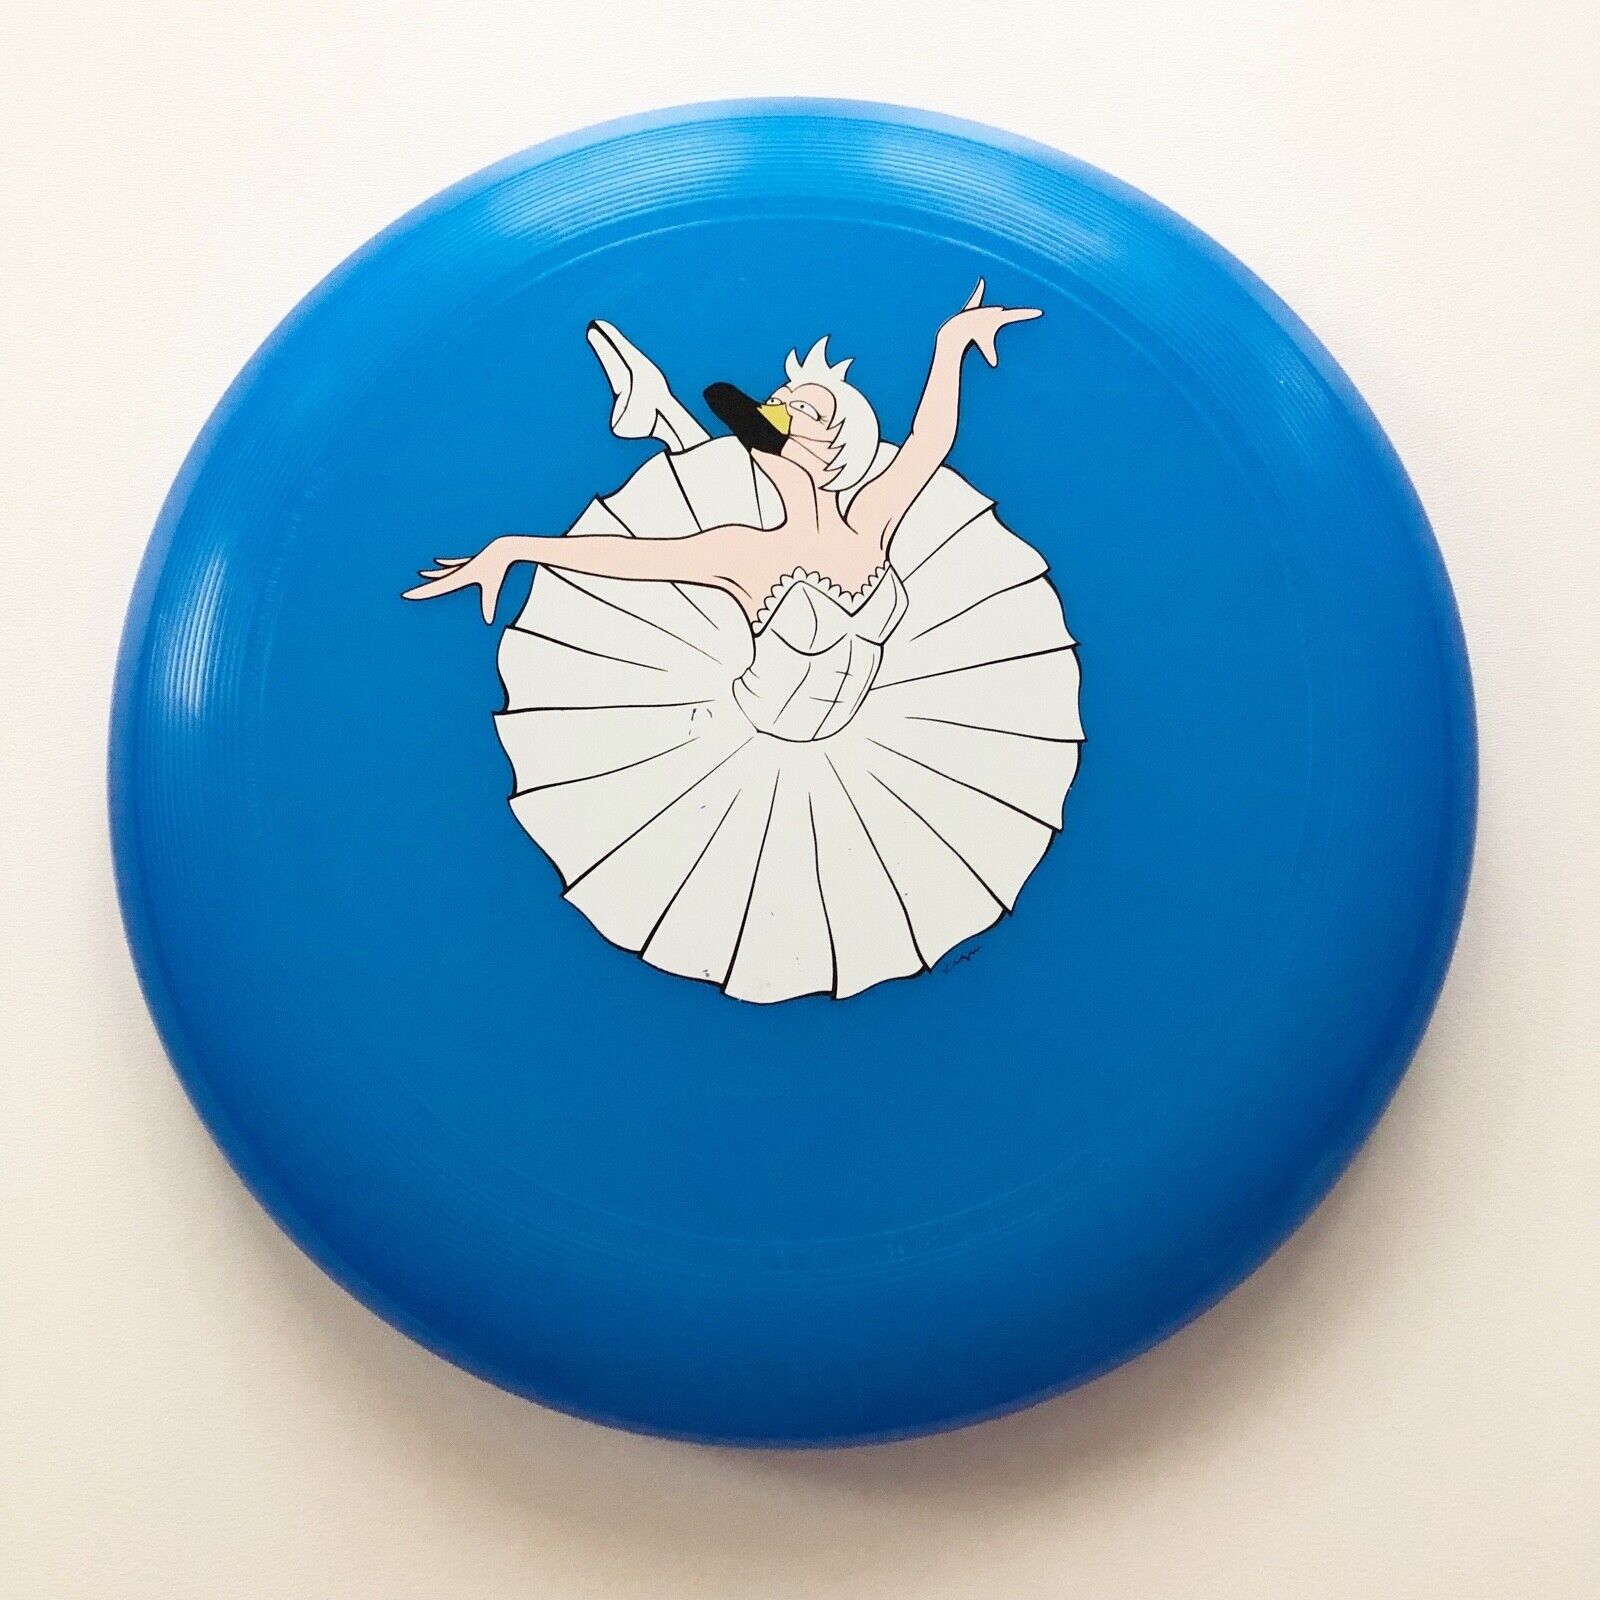 Max 54% OFF Vintage 1980 WHAM-O Frisbee Blue Ballerina Museum KIZM by o Save money MoMA